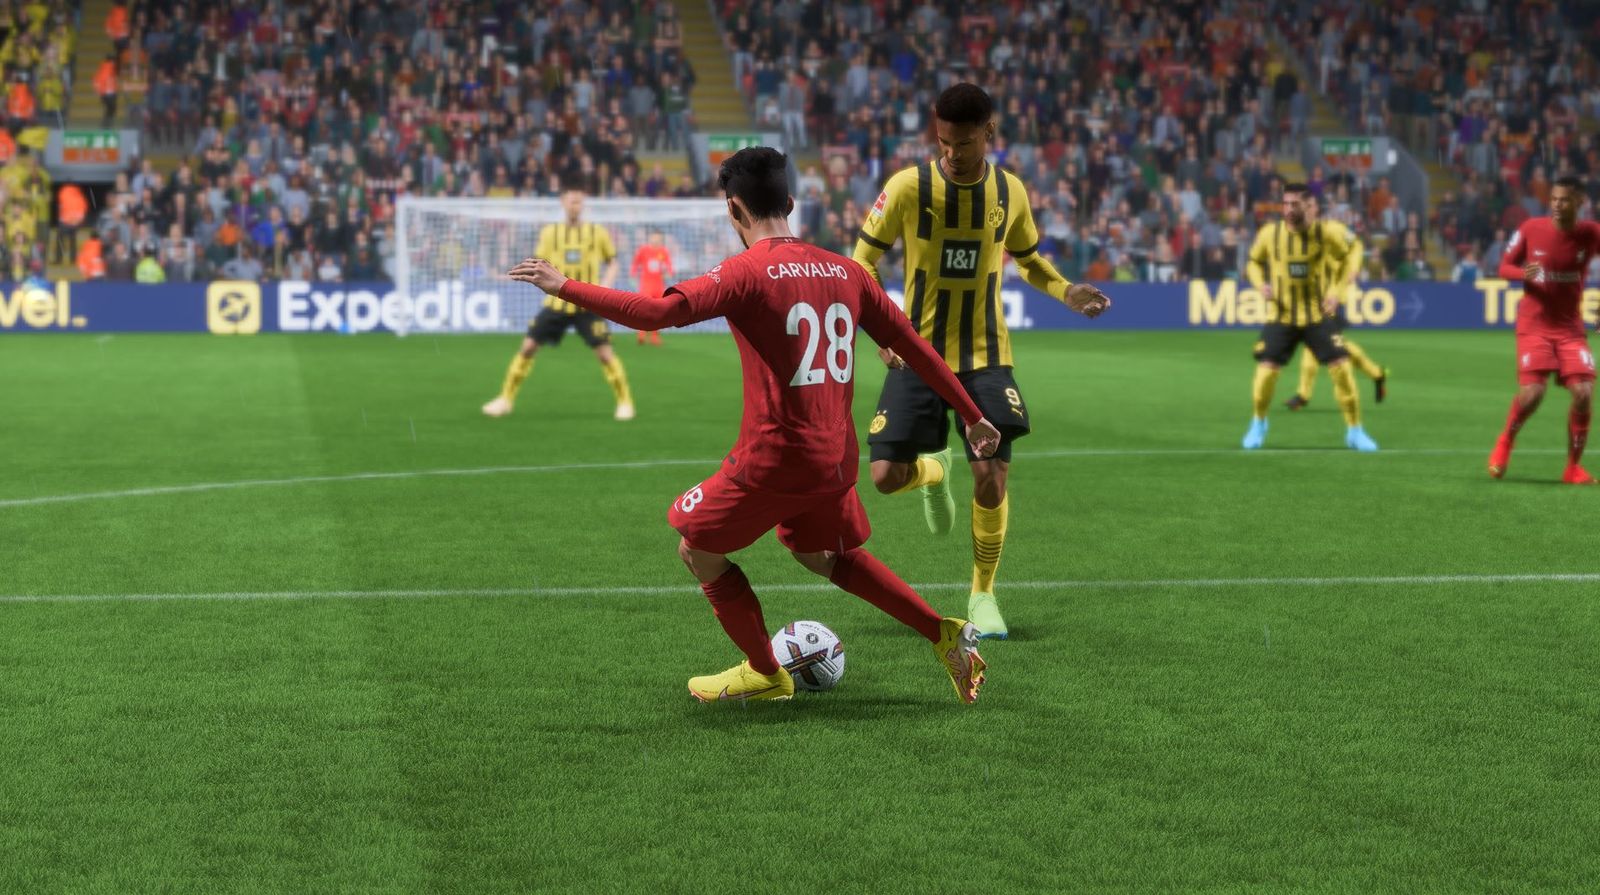 Fabio Carvalho plays a pass in FIFA 23